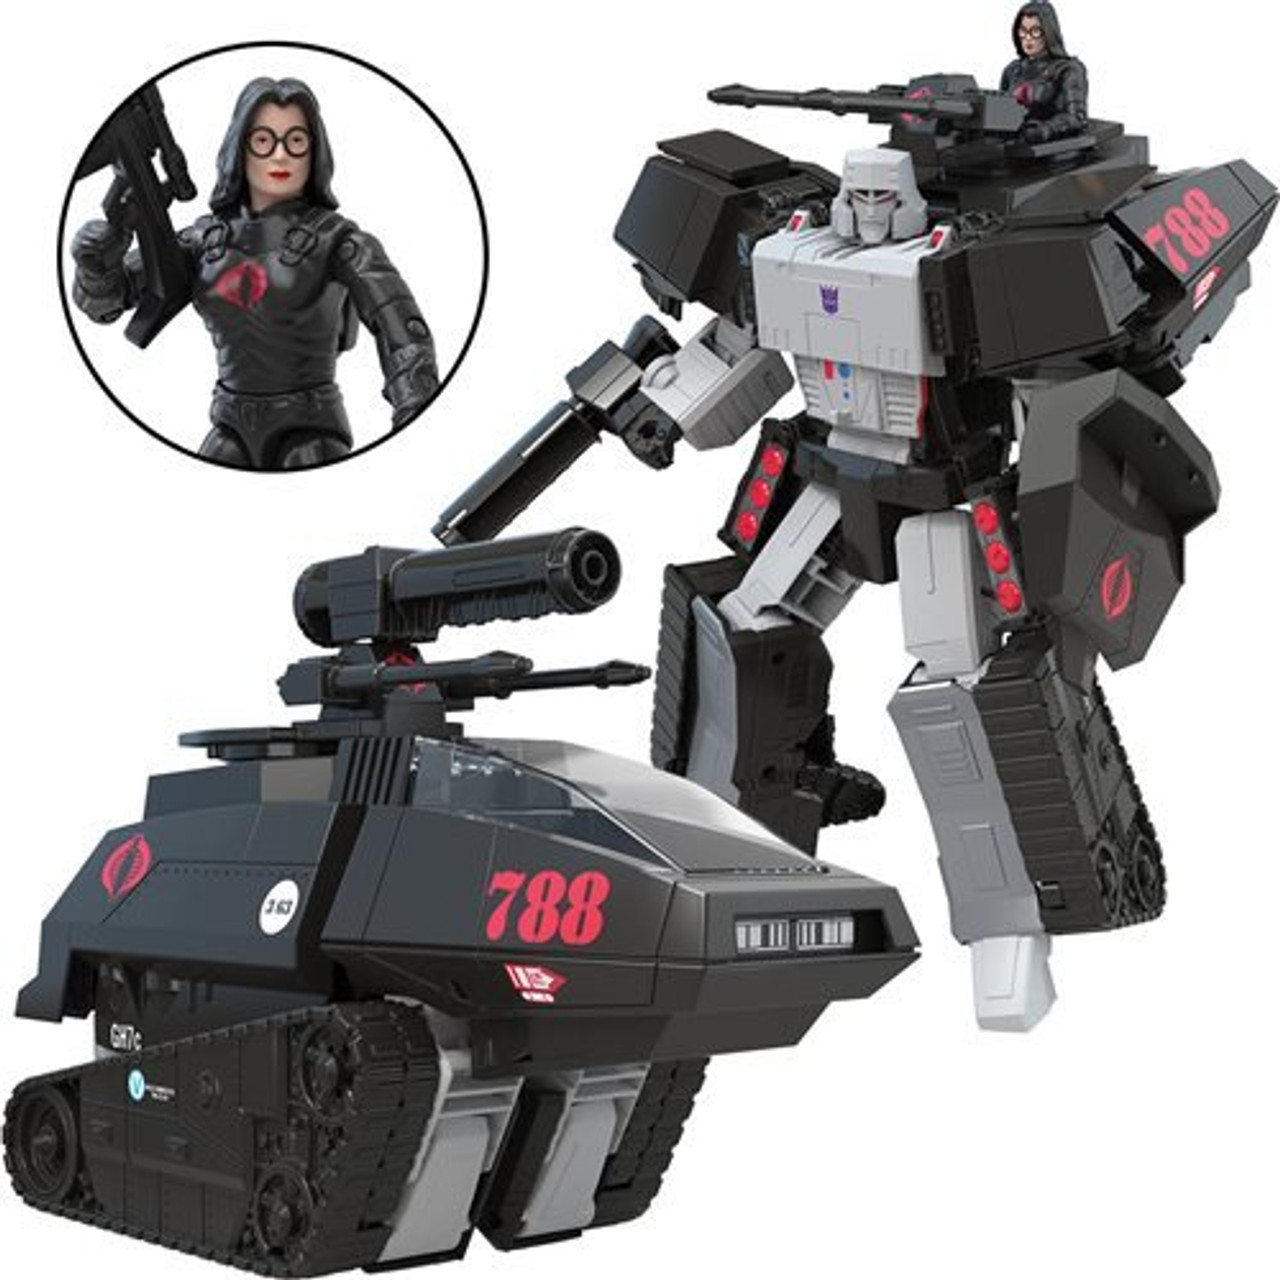 Cobra　Joe　with　Baroness　Collaborative:　Transformers　Megatron　Mash-Up，　Generations　Ages　and　Tank　Figure，　Up（並行輸入品）-